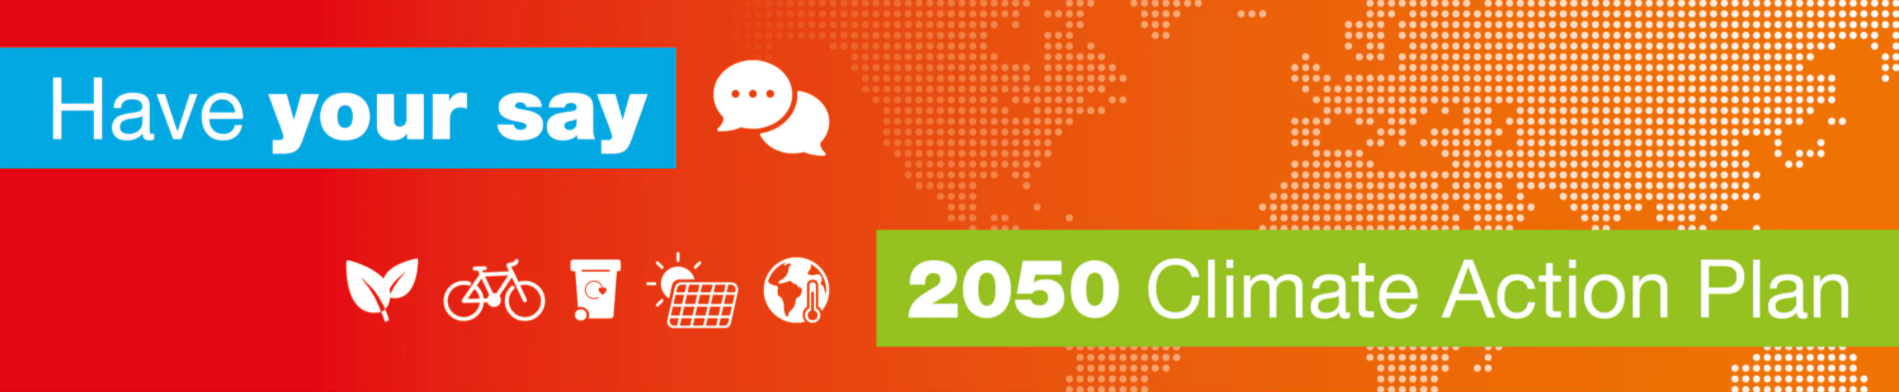 2050 Climate Action Plan